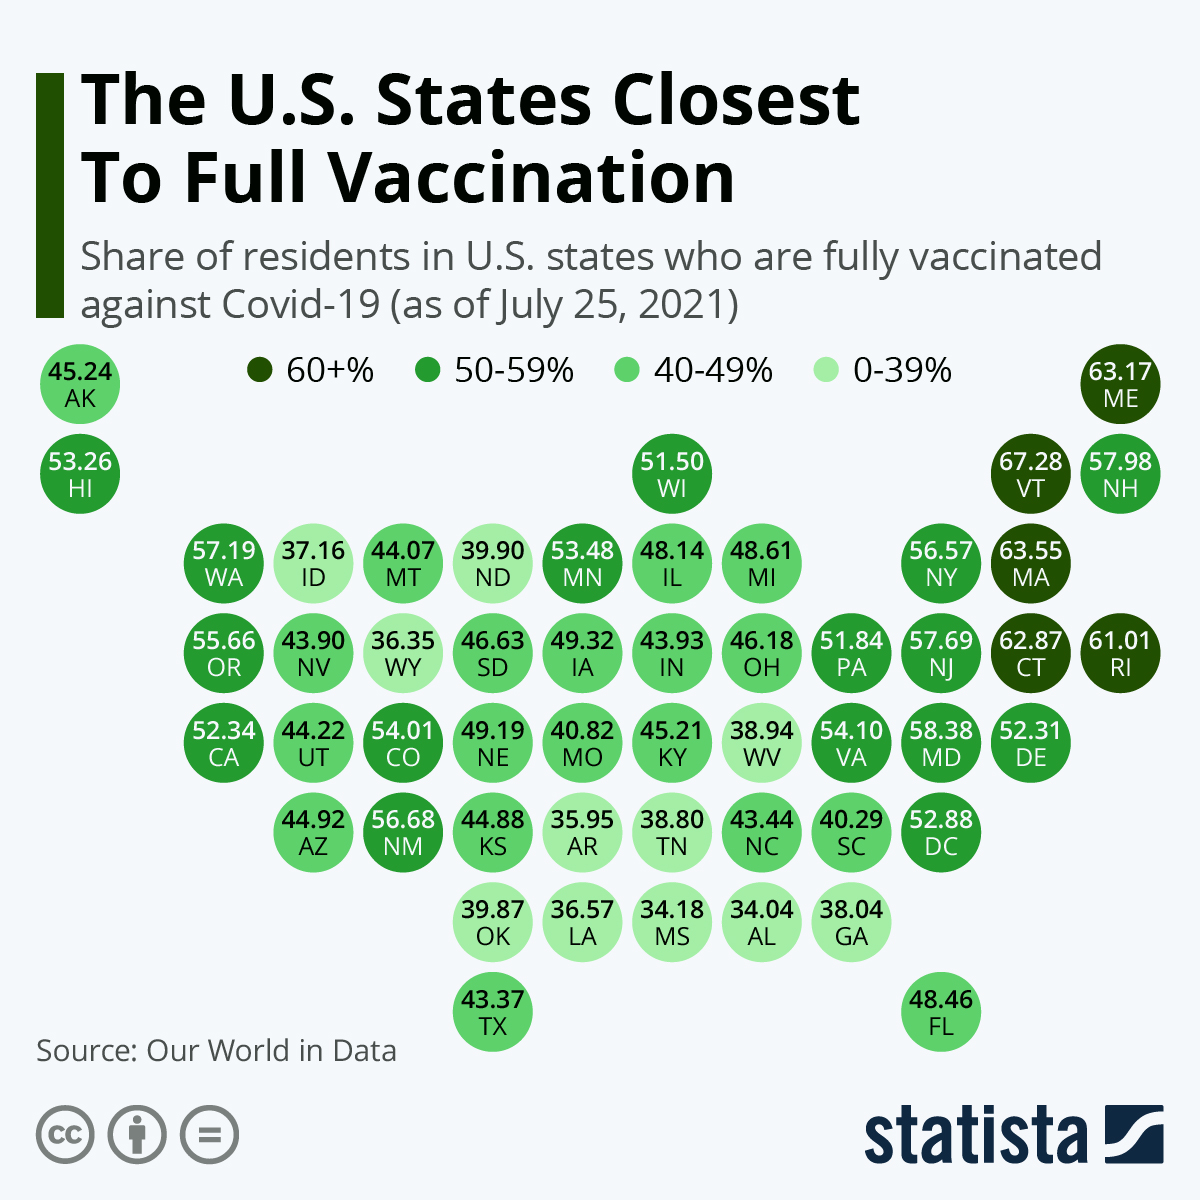 The U.S. States Closest To Full Vaccination
